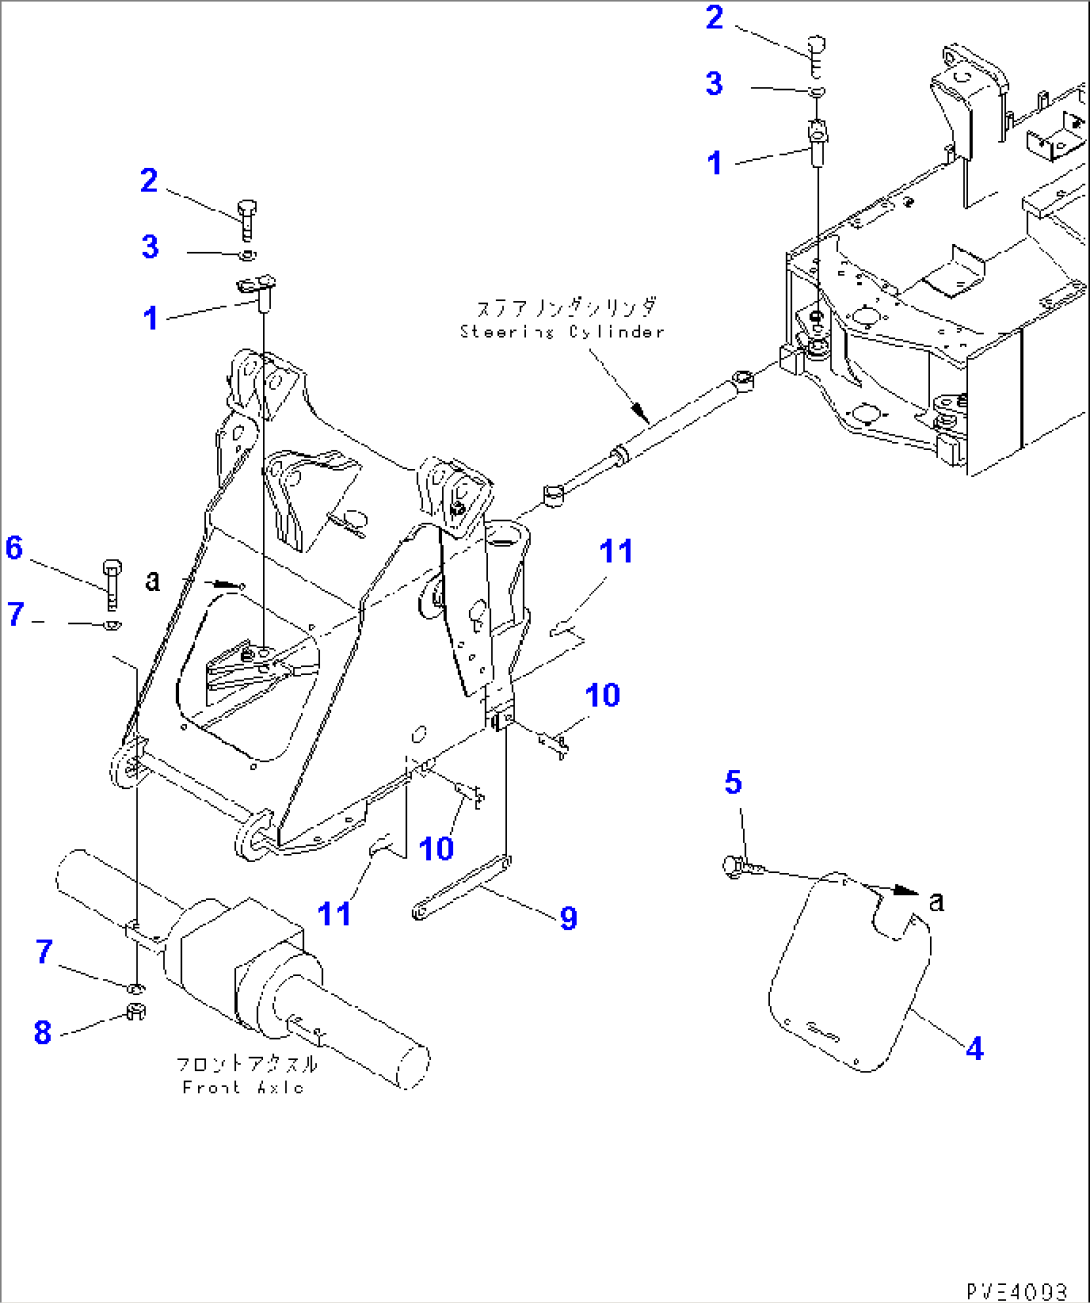 LOCK AND COVER (FOR FRONT AND REAR FRAME) (FOR 3-SPOOL VALVE)